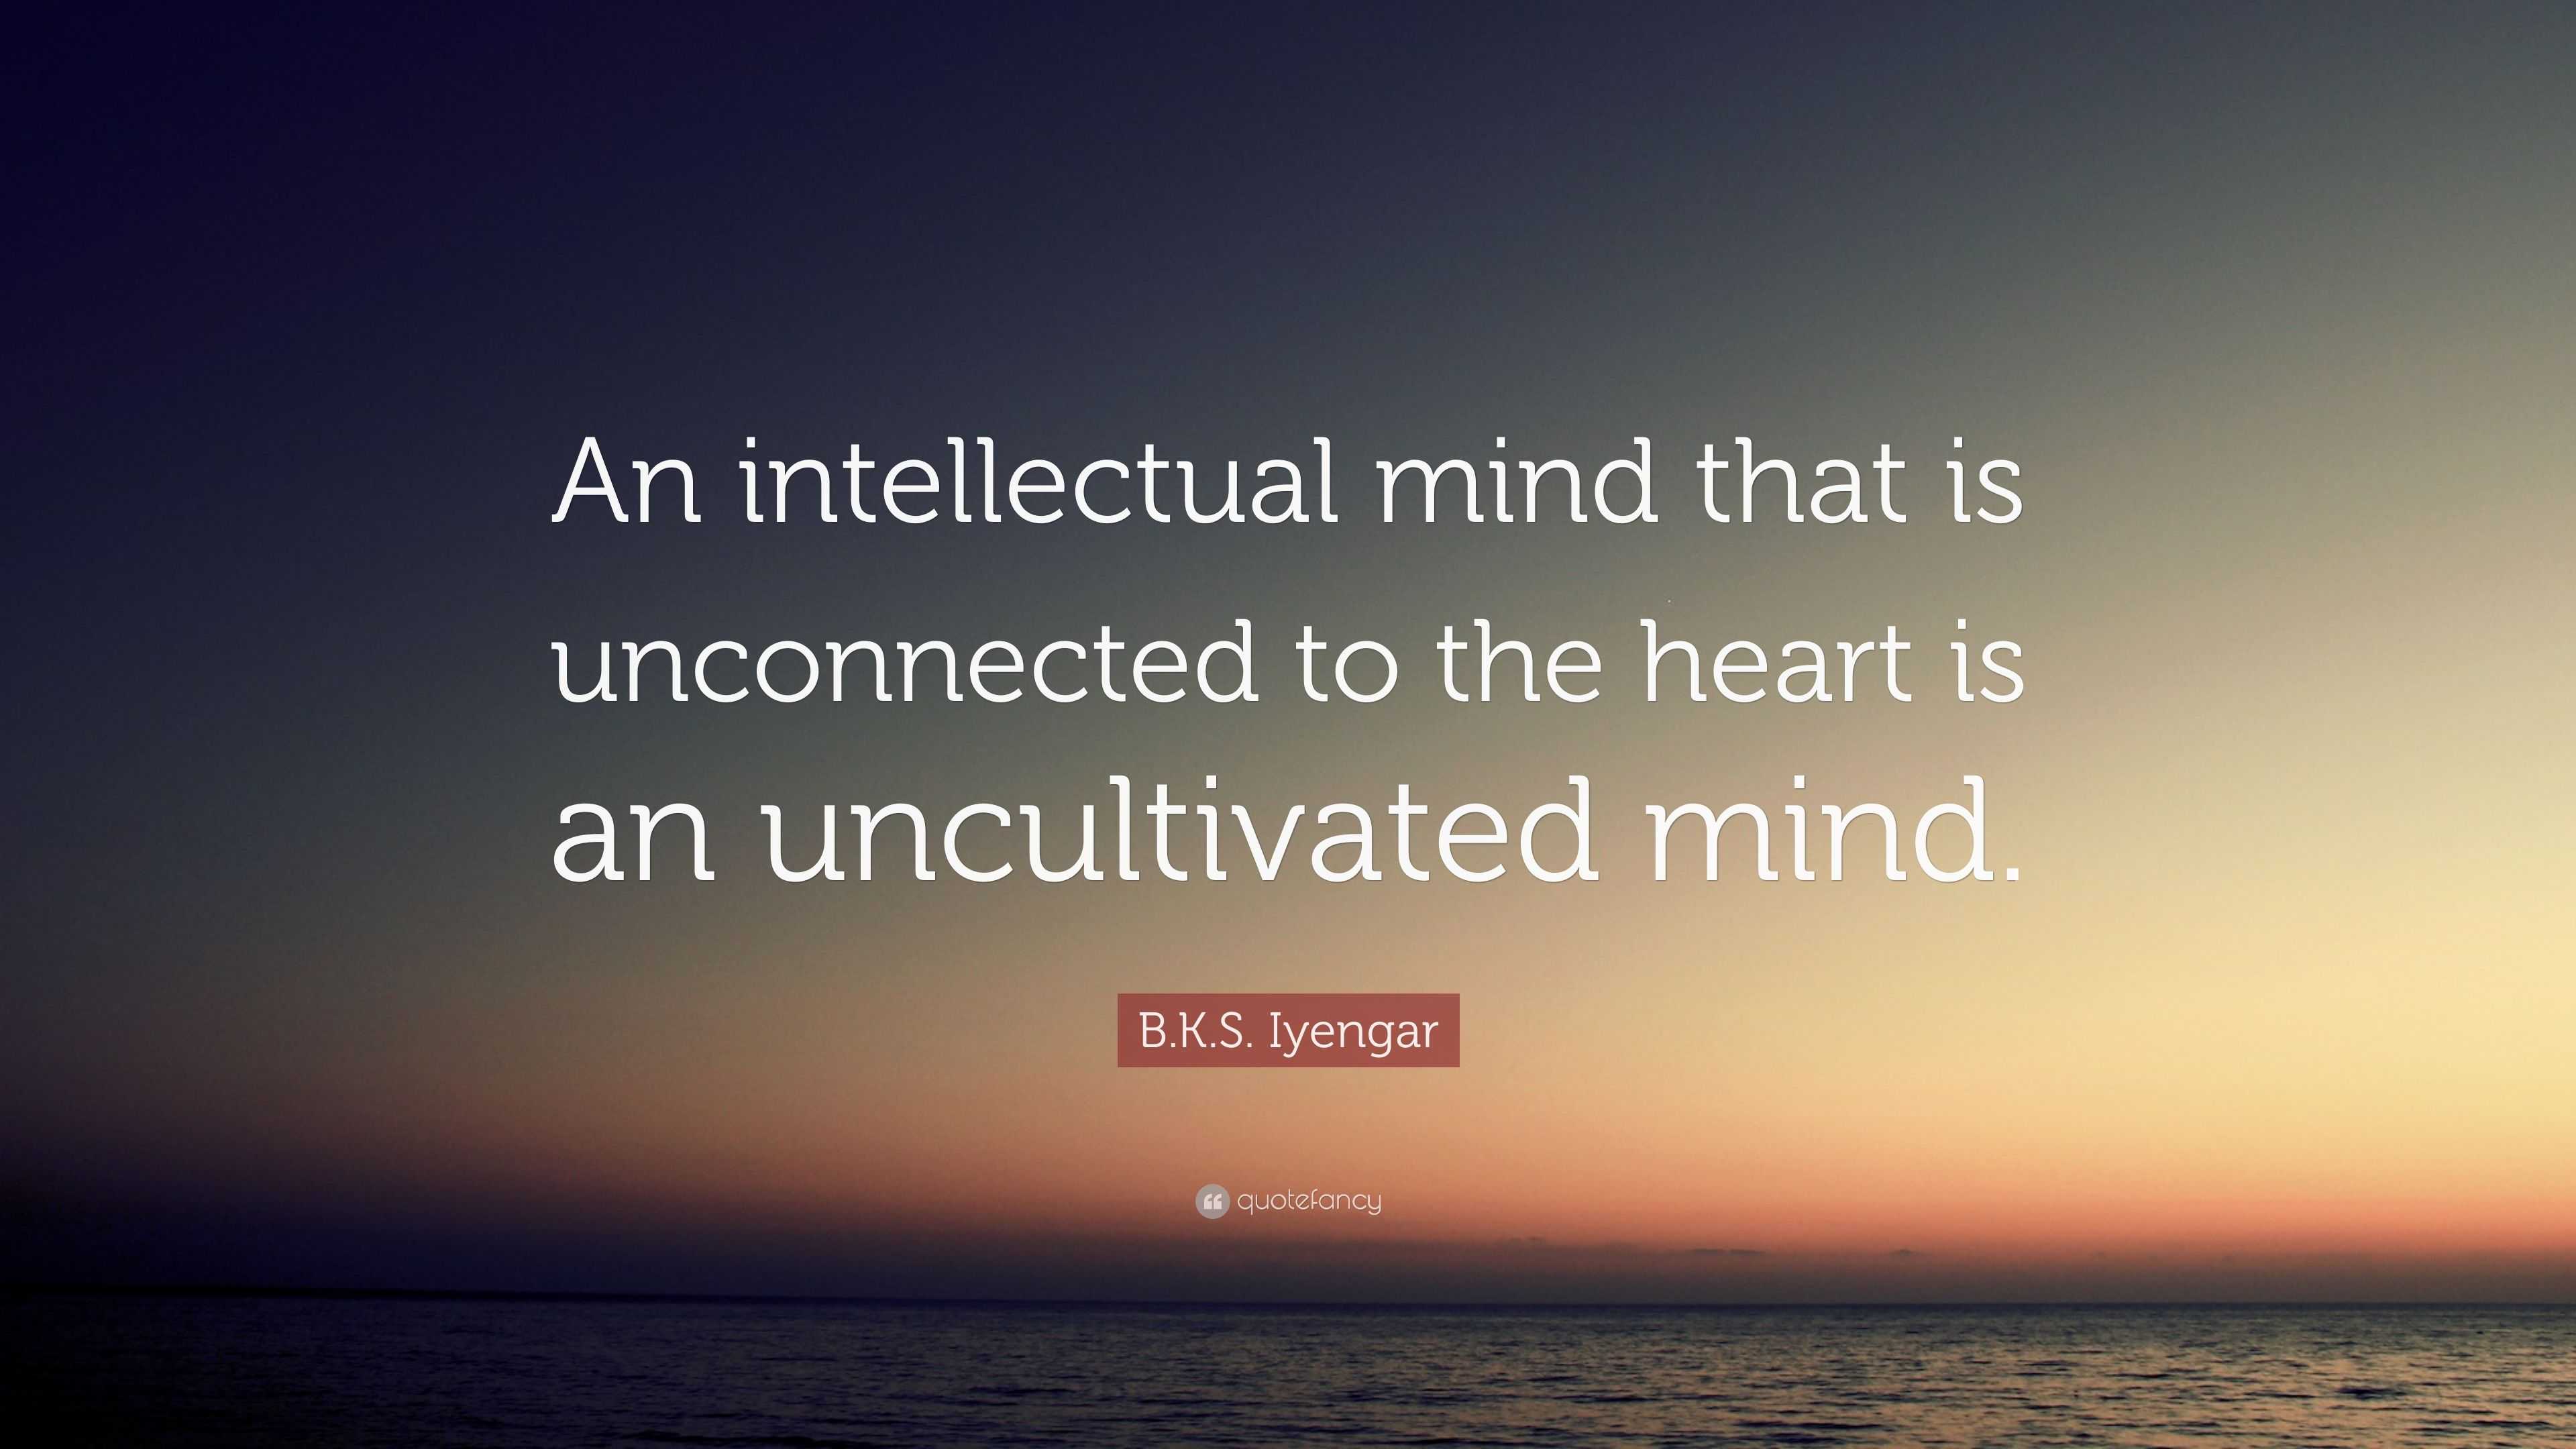 B.K.S. Iyengar Quote: “An intellectual mind that is unconnected to the ...